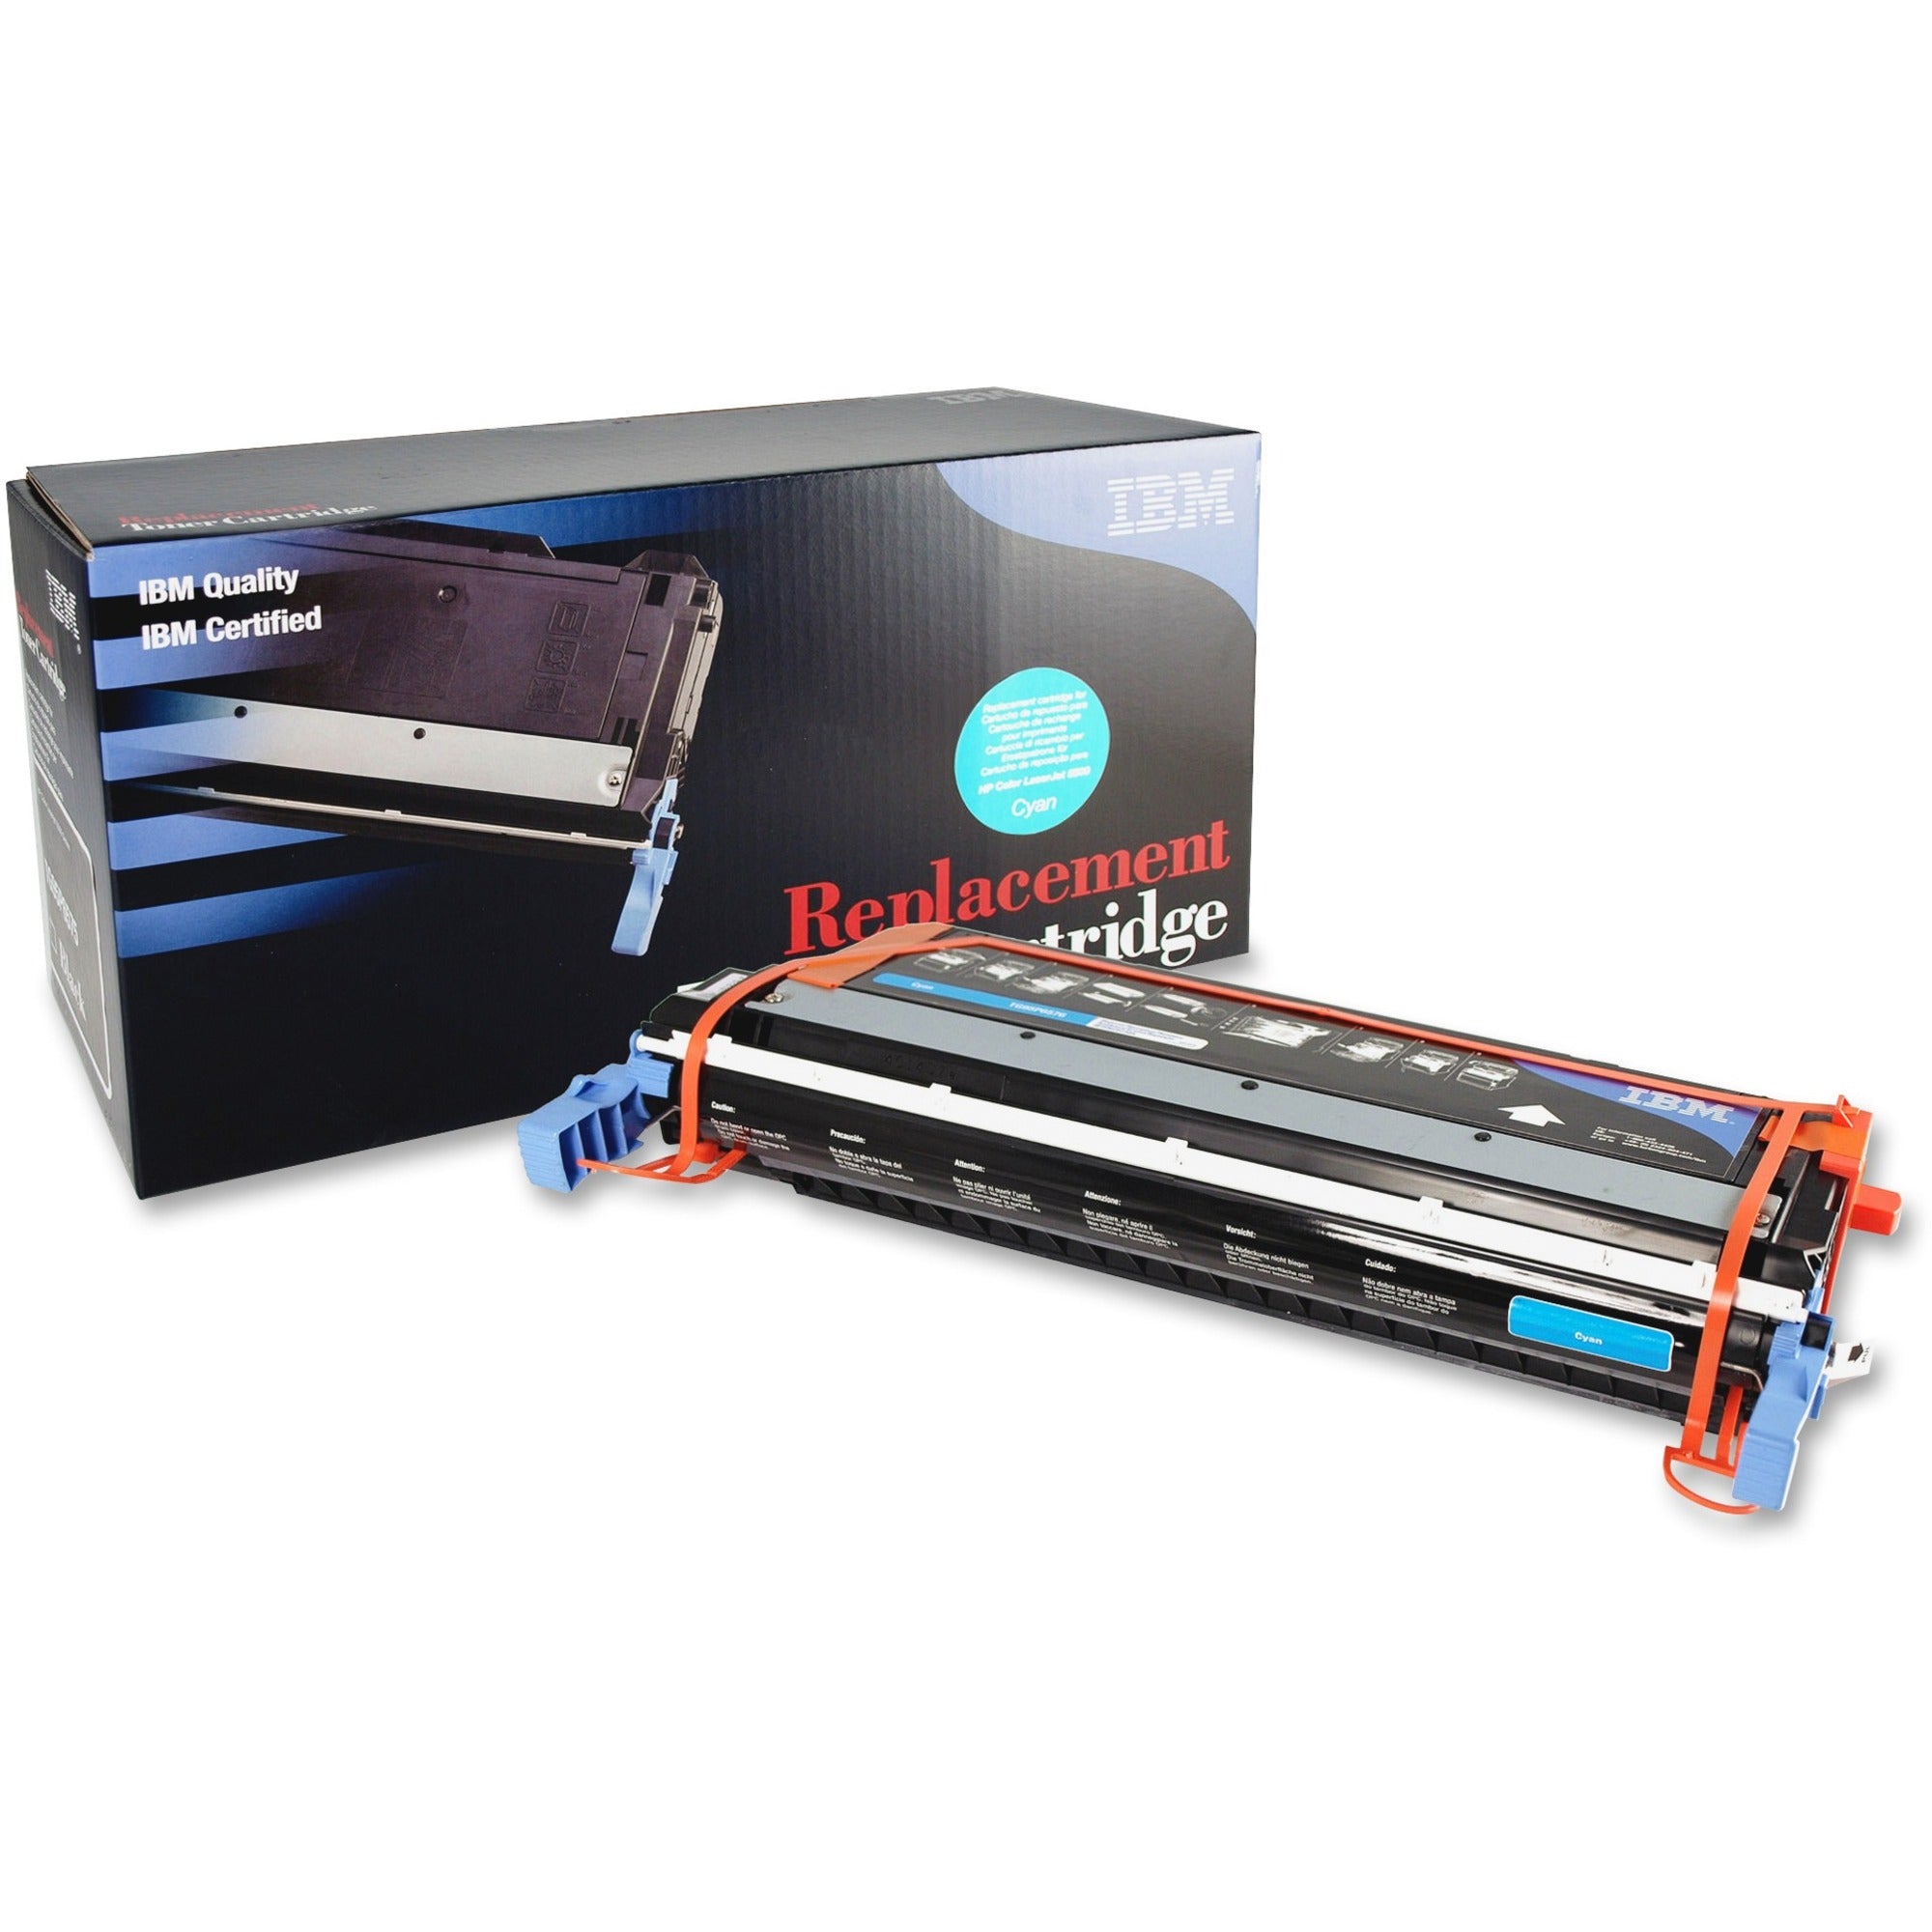 IBM Remanufactured Toner Cartridge - Alternative for HP 645A (C9731A) - Laser - 12000 Pages - Cyan - 1 Each - 